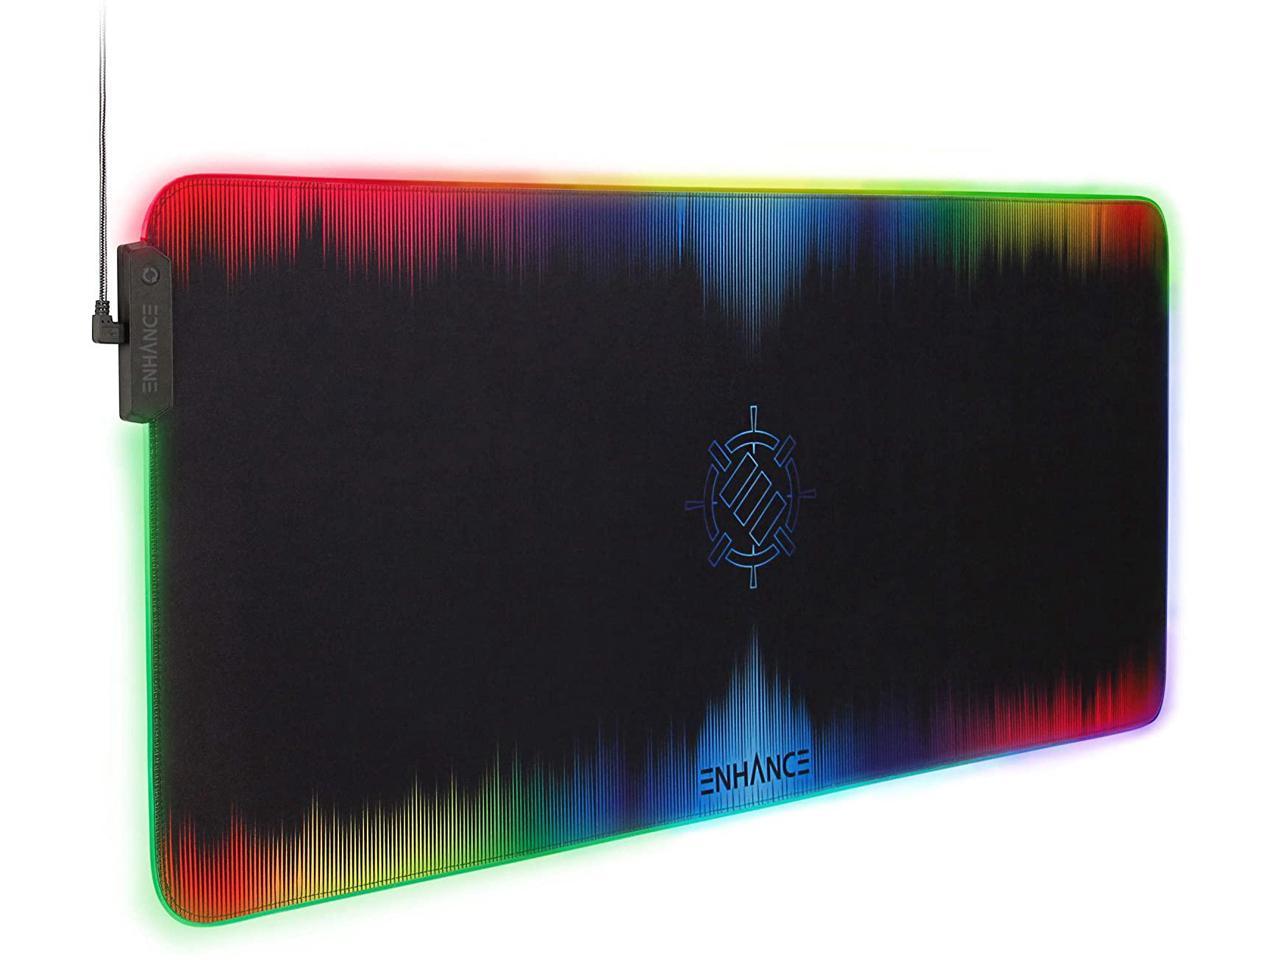 ENHANCE Extra Large LED Gaming Mouse Pad - Soft XXL Desk Mat with 7 RGB